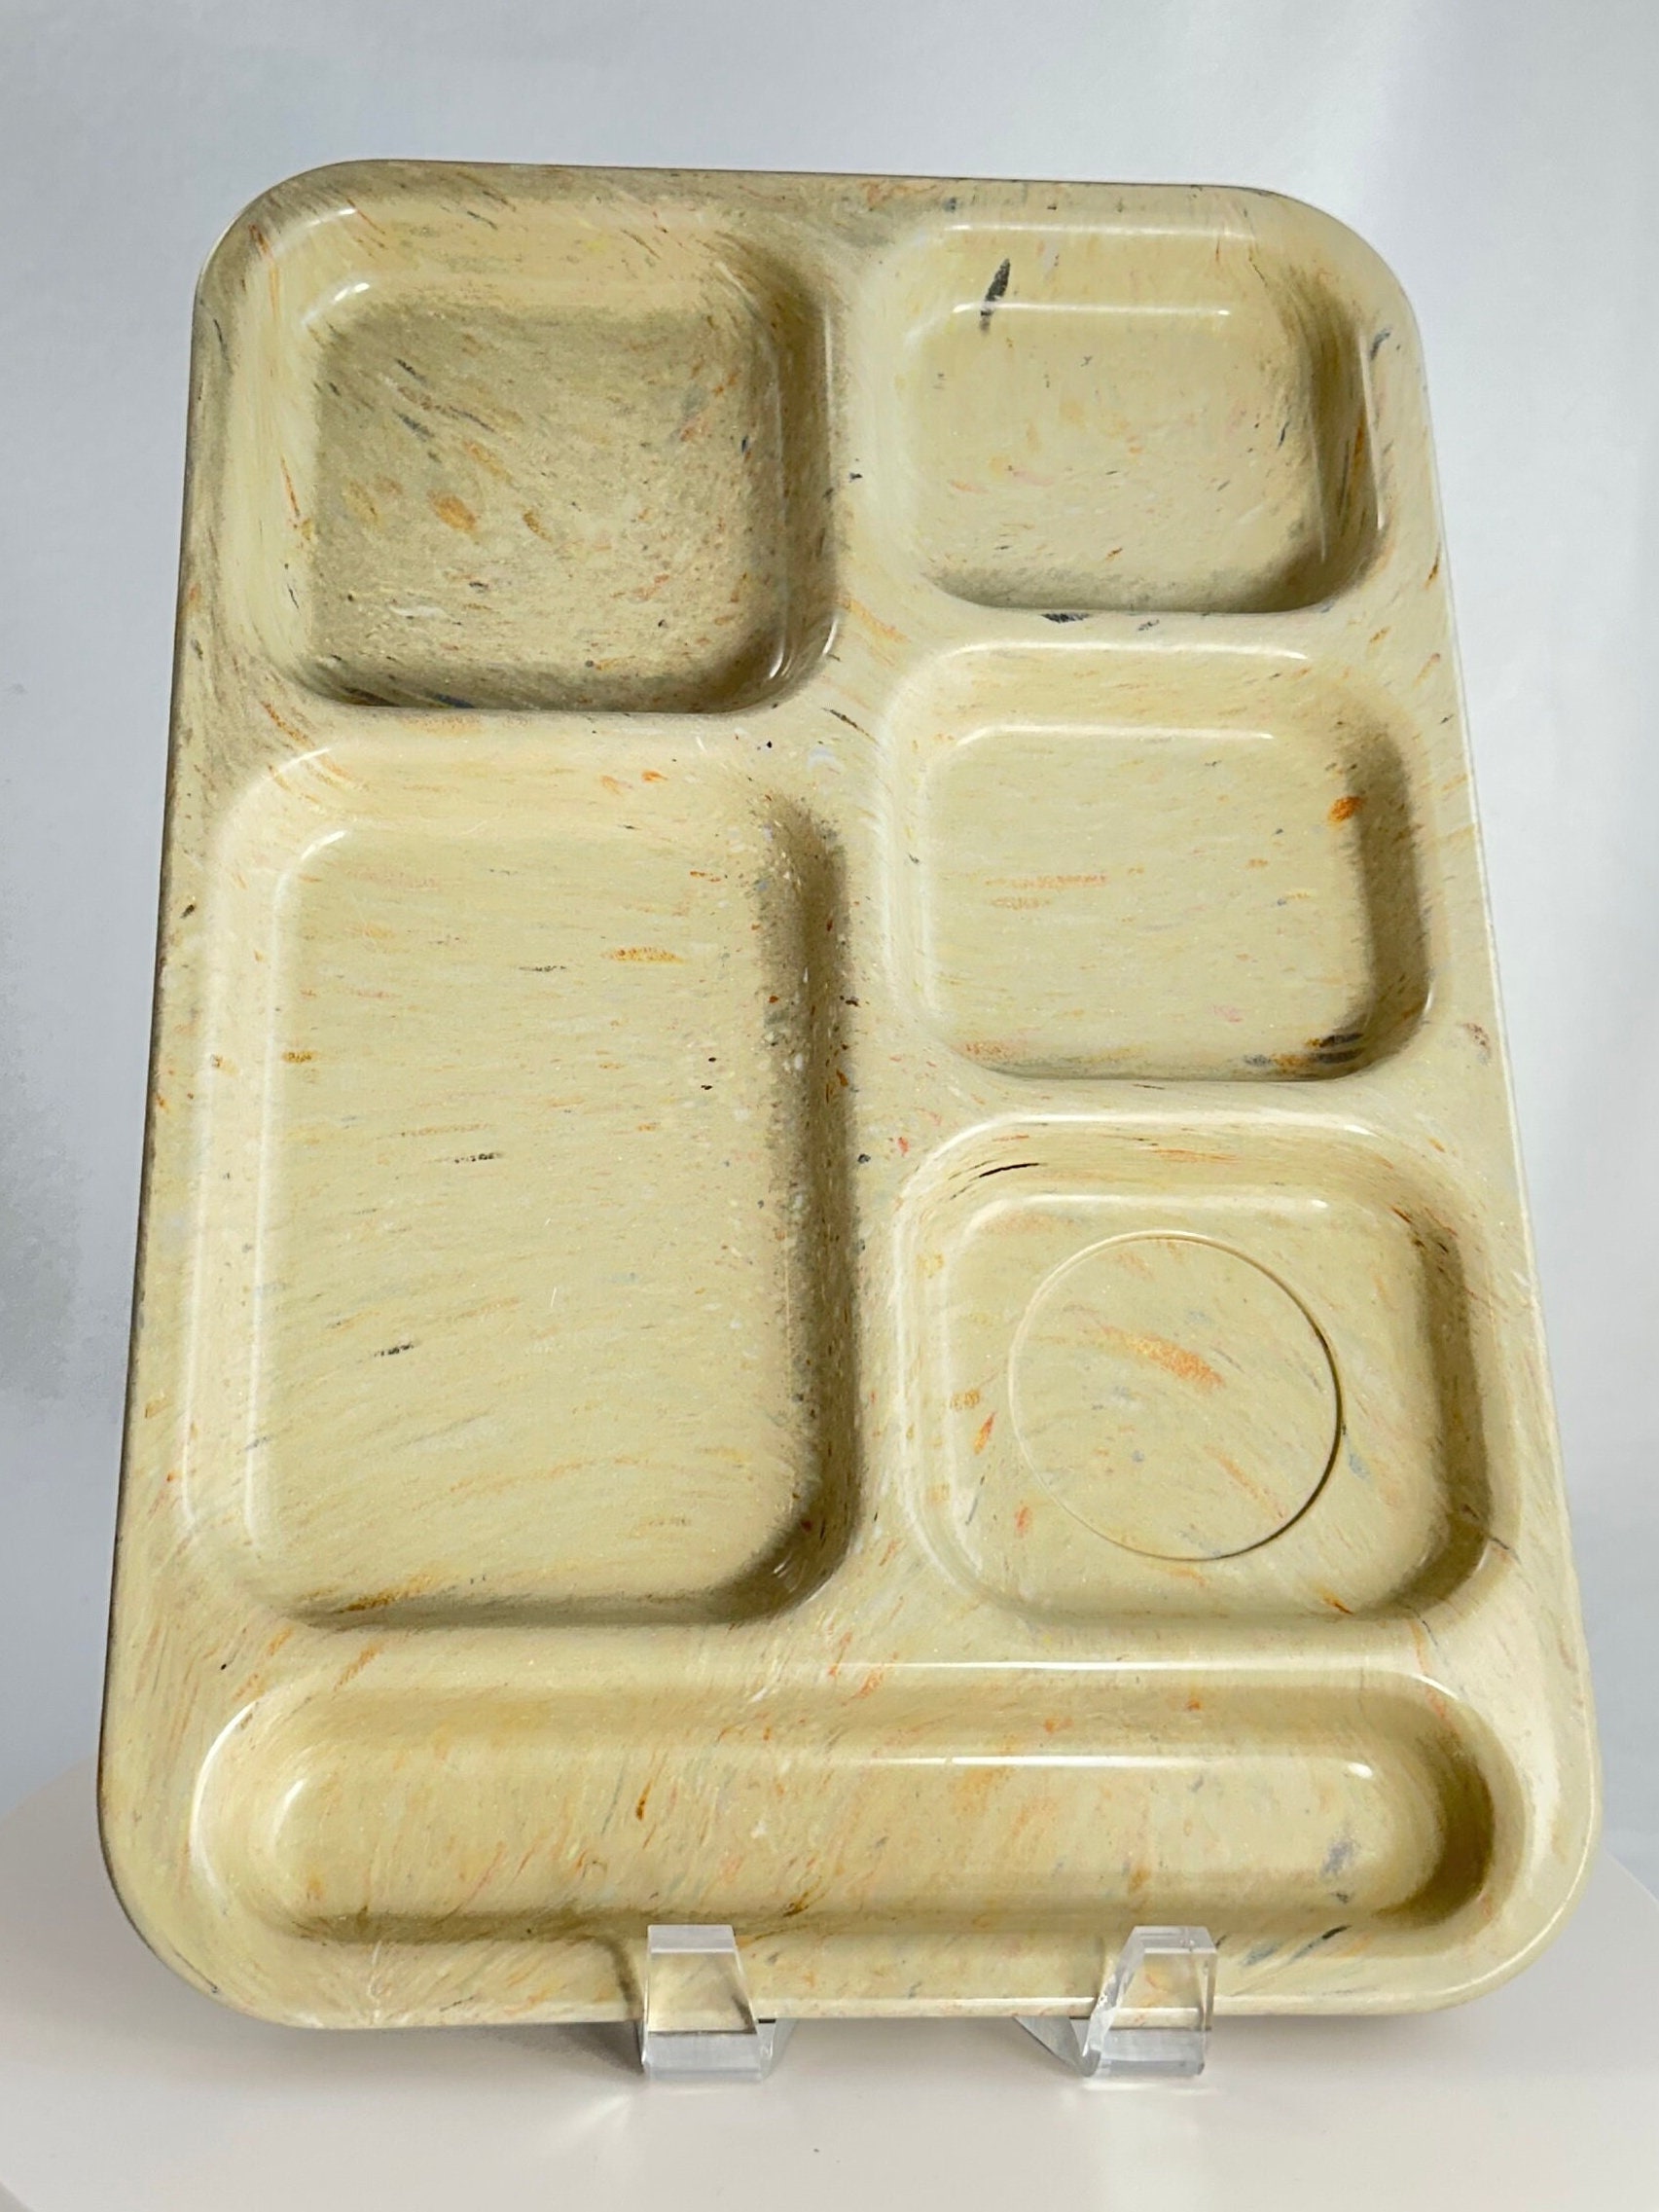 4 Vintage DALLAS WARE Mint Green Cafeteria Lunch Trays w/ 6 Compartments